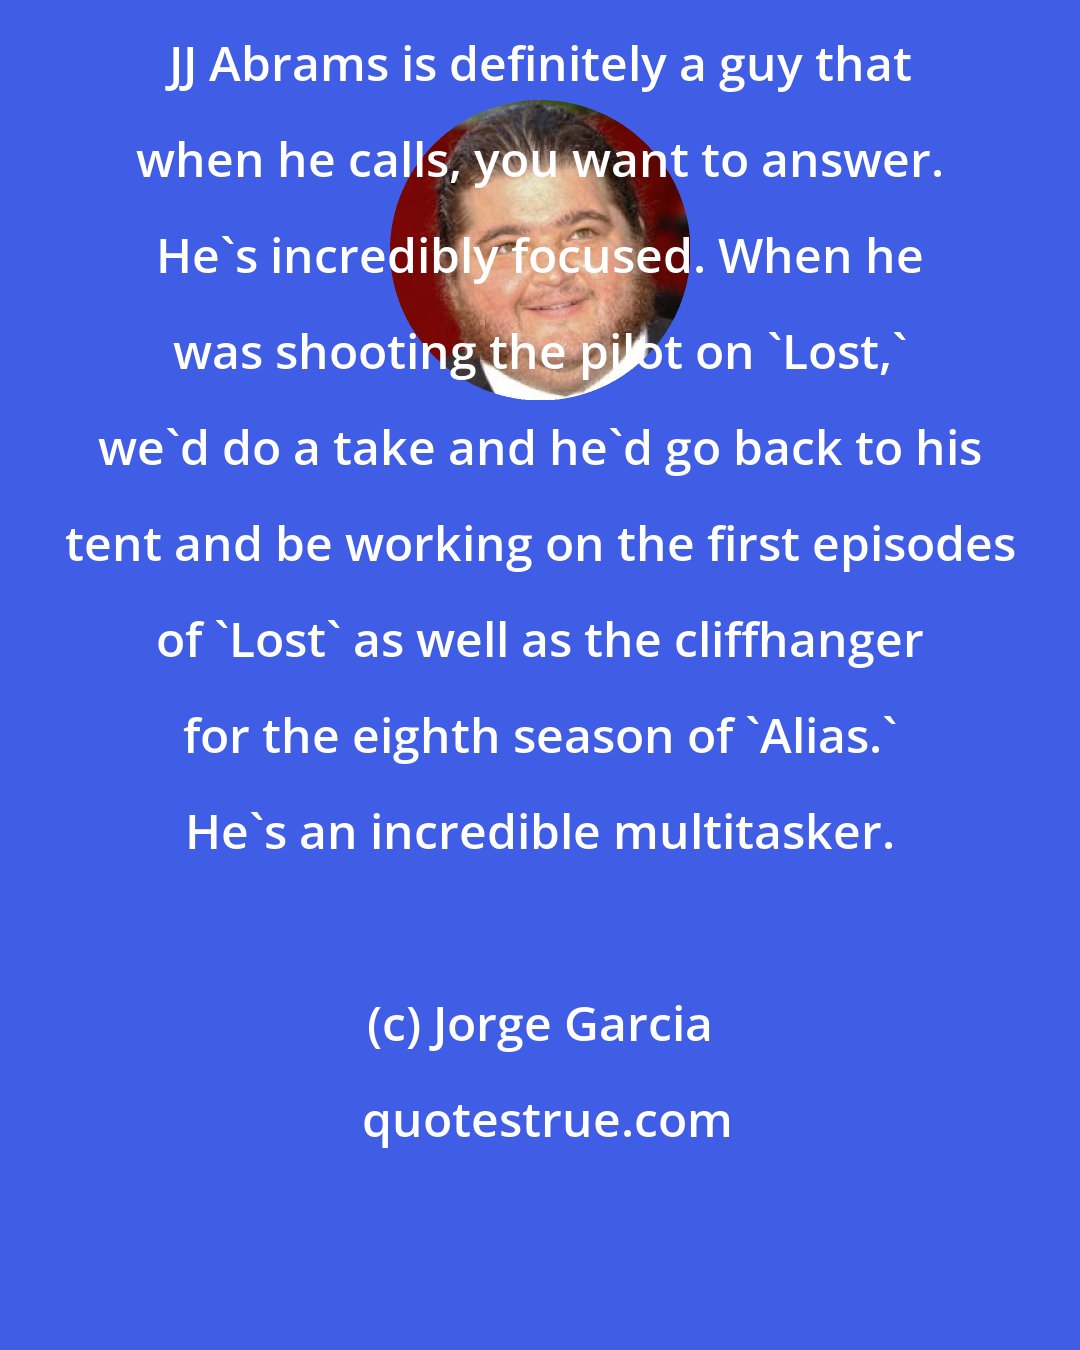 Jorge Garcia: JJ Abrams is definitely a guy that when he calls, you want to answer. He's incredibly focused. When he was shooting the pilot on 'Lost,' we'd do a take and he'd go back to his tent and be working on the first episodes of 'Lost' as well as the cliffhanger for the eighth season of 'Alias.' He's an incredible multitasker.